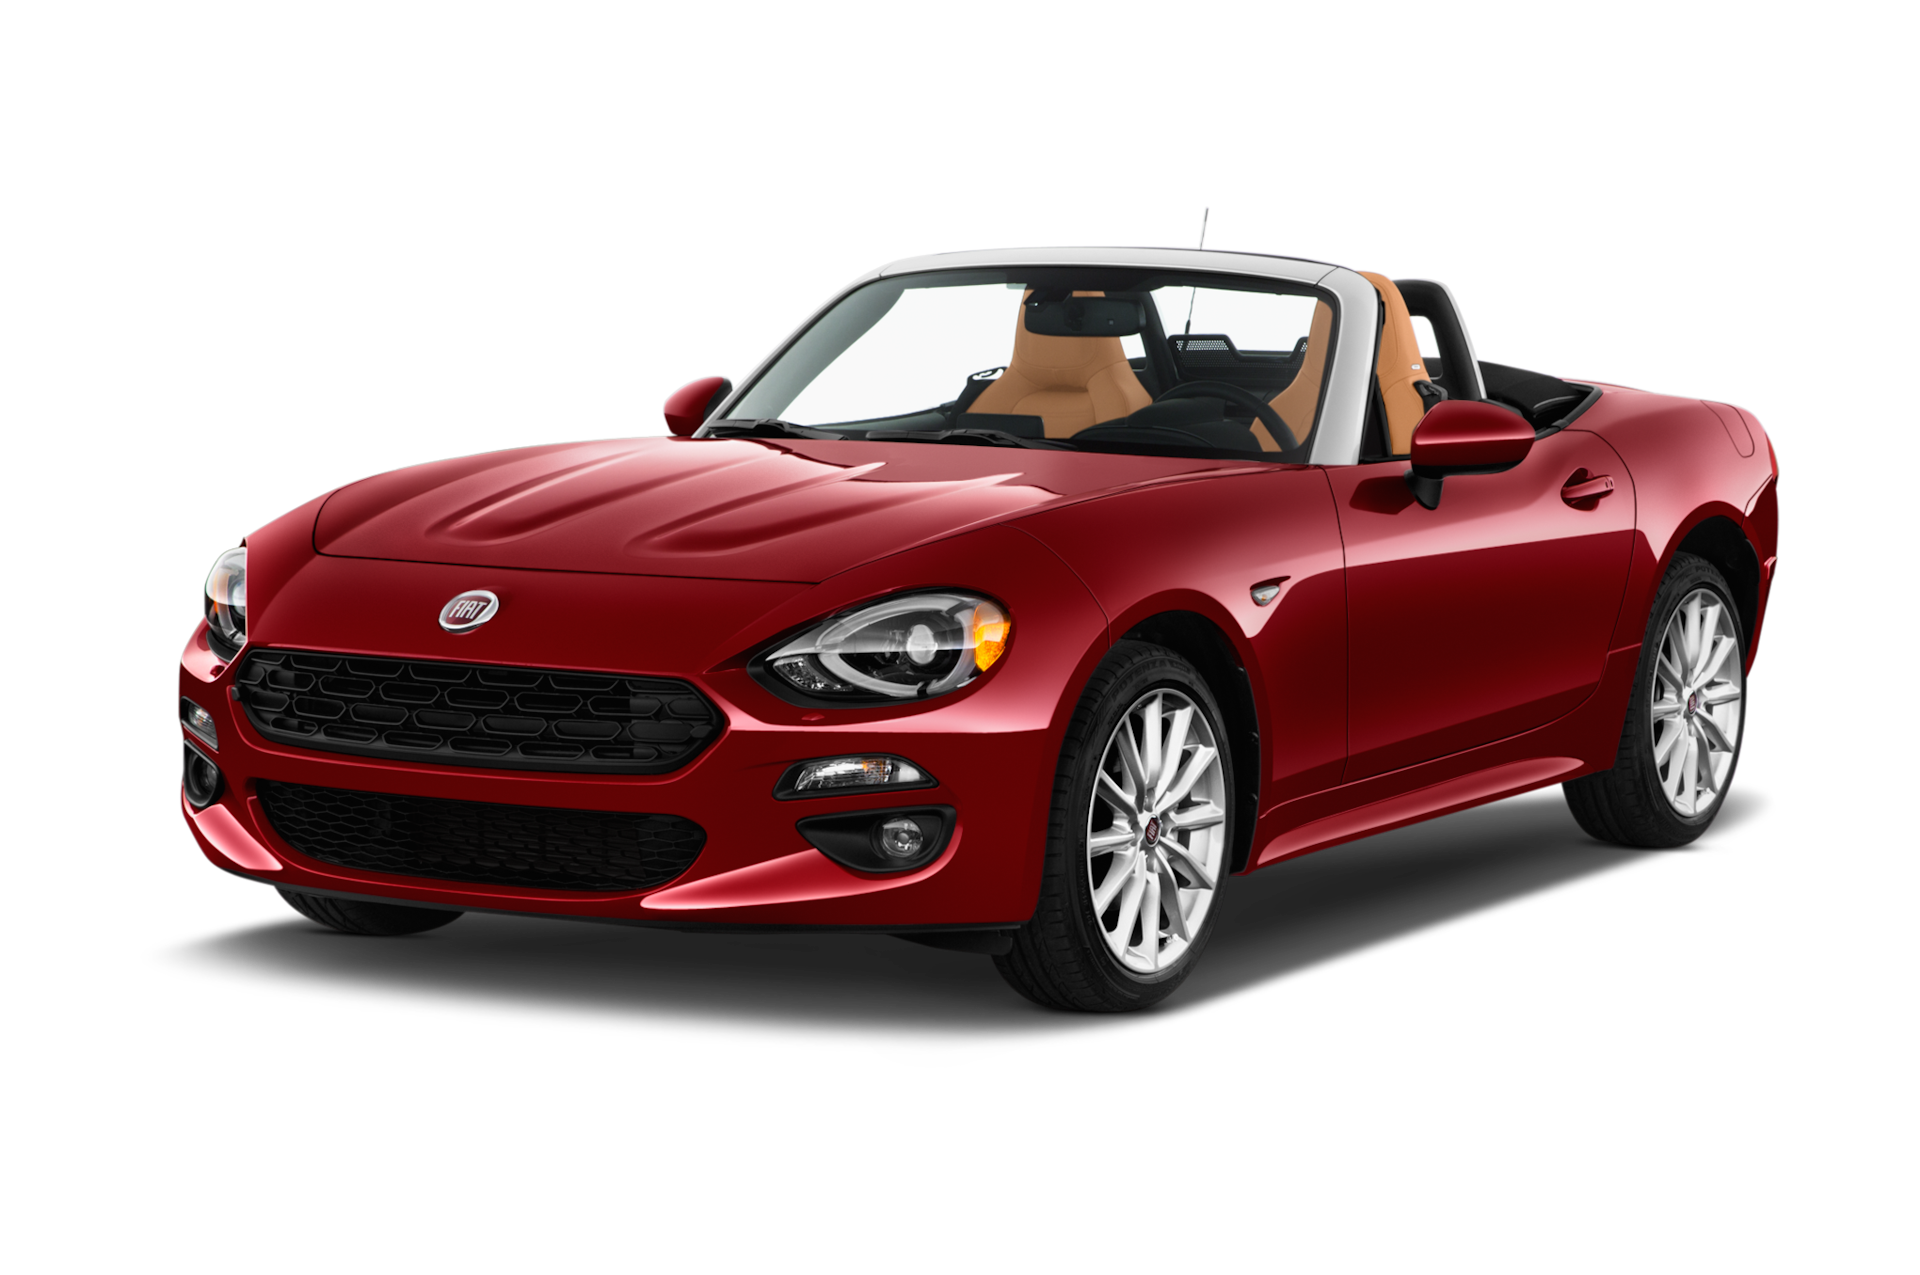 2018 FIAT 124 Spider Prices, Reviews, and Photos - MotorTrend